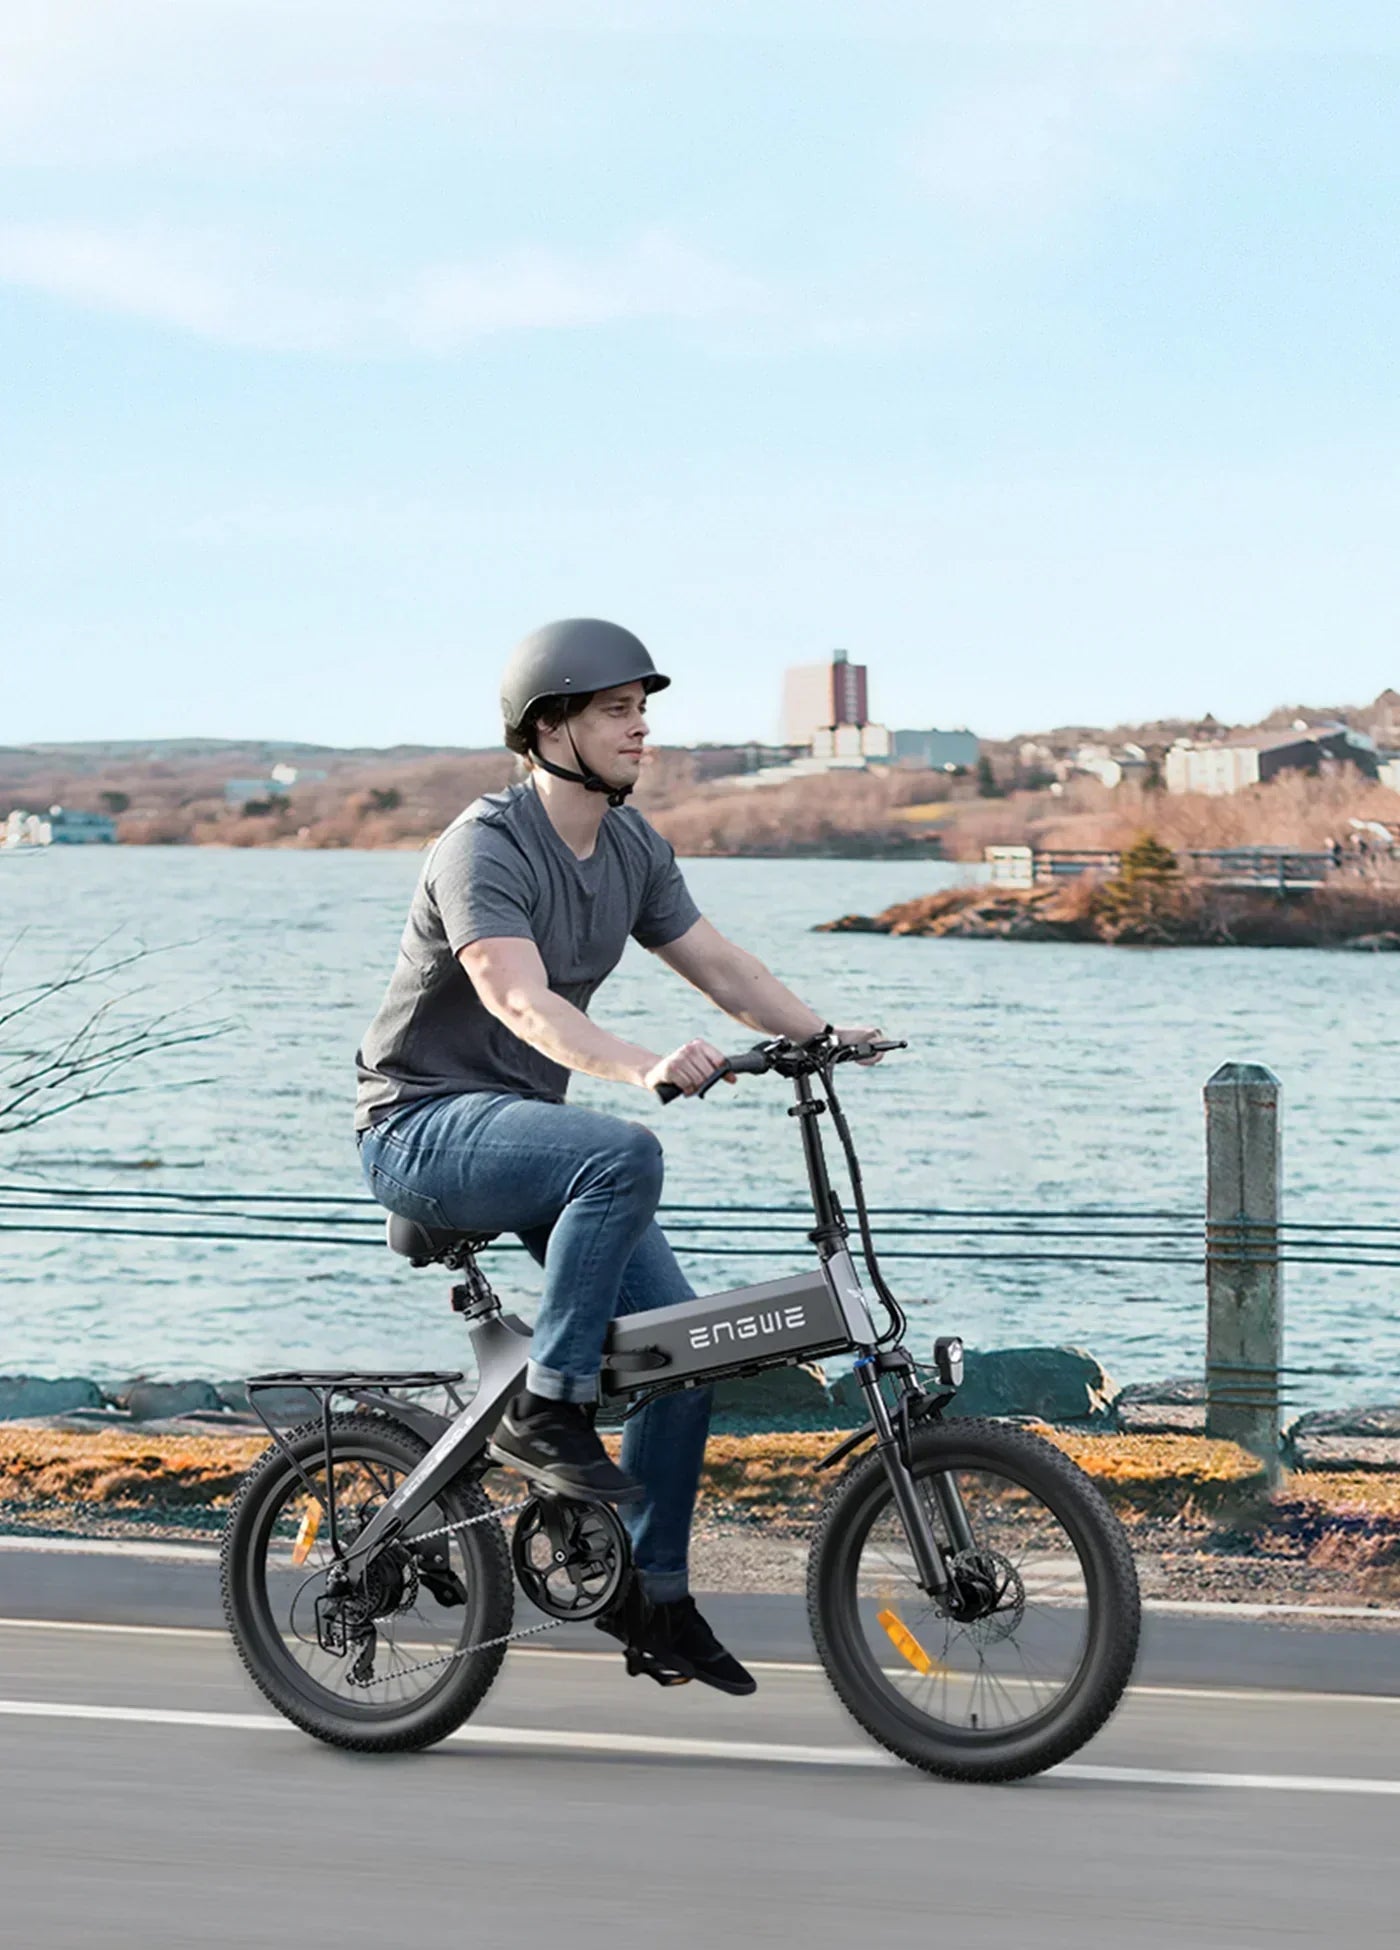 ENGWE C20 Pro (Upgraded Version) Folding Electric Bike - Pogo Cycles available in cycle to work